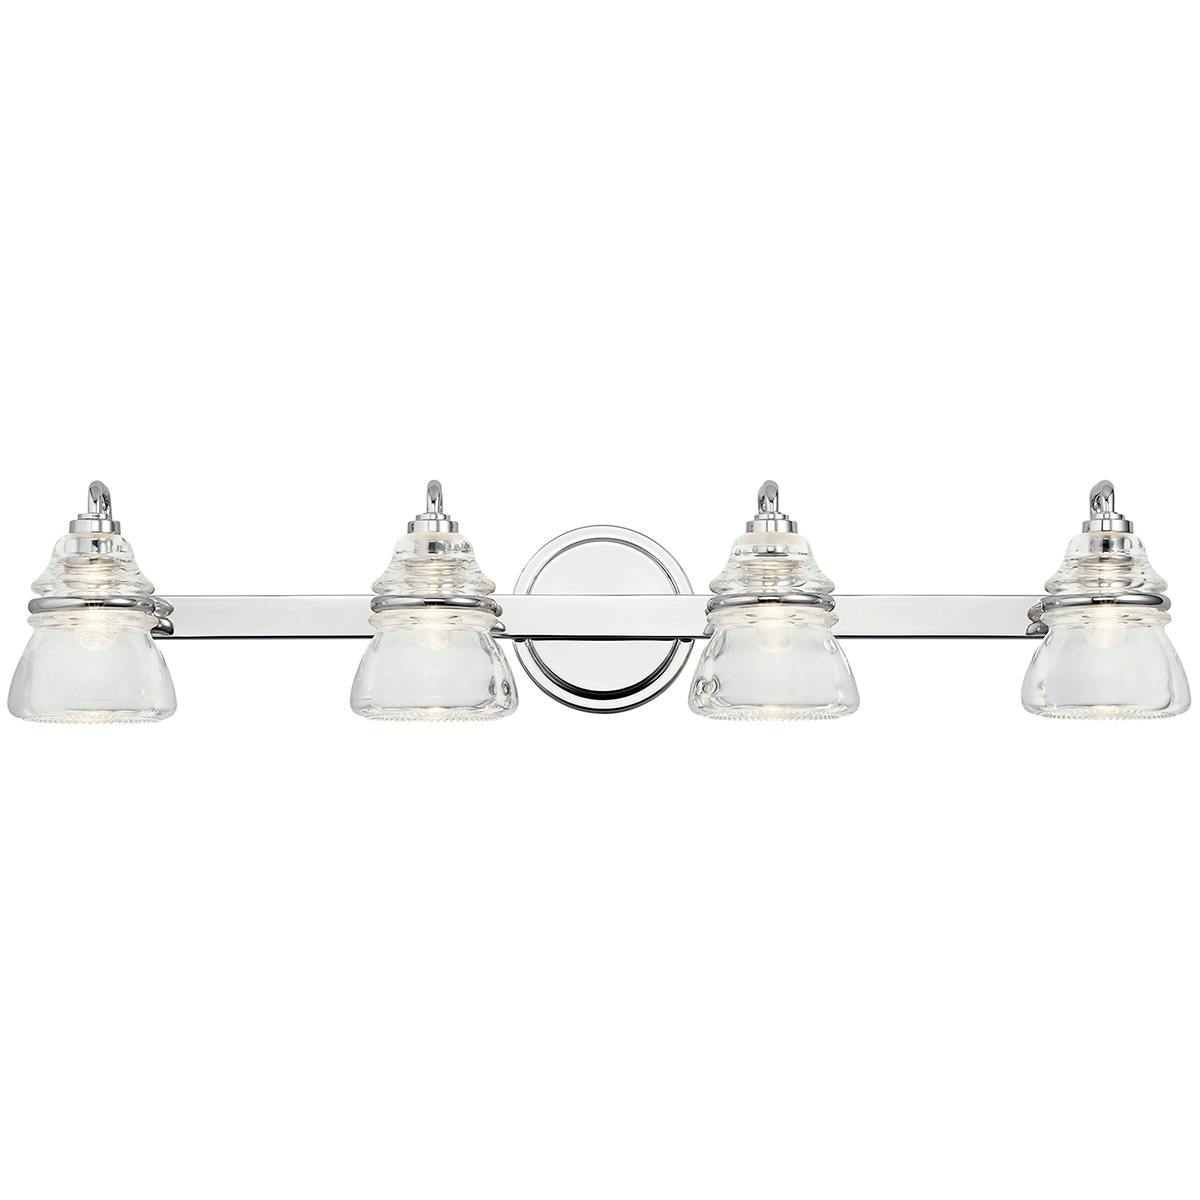 Front view of the Talland 4 Light Vanity Light Chrome on a white background